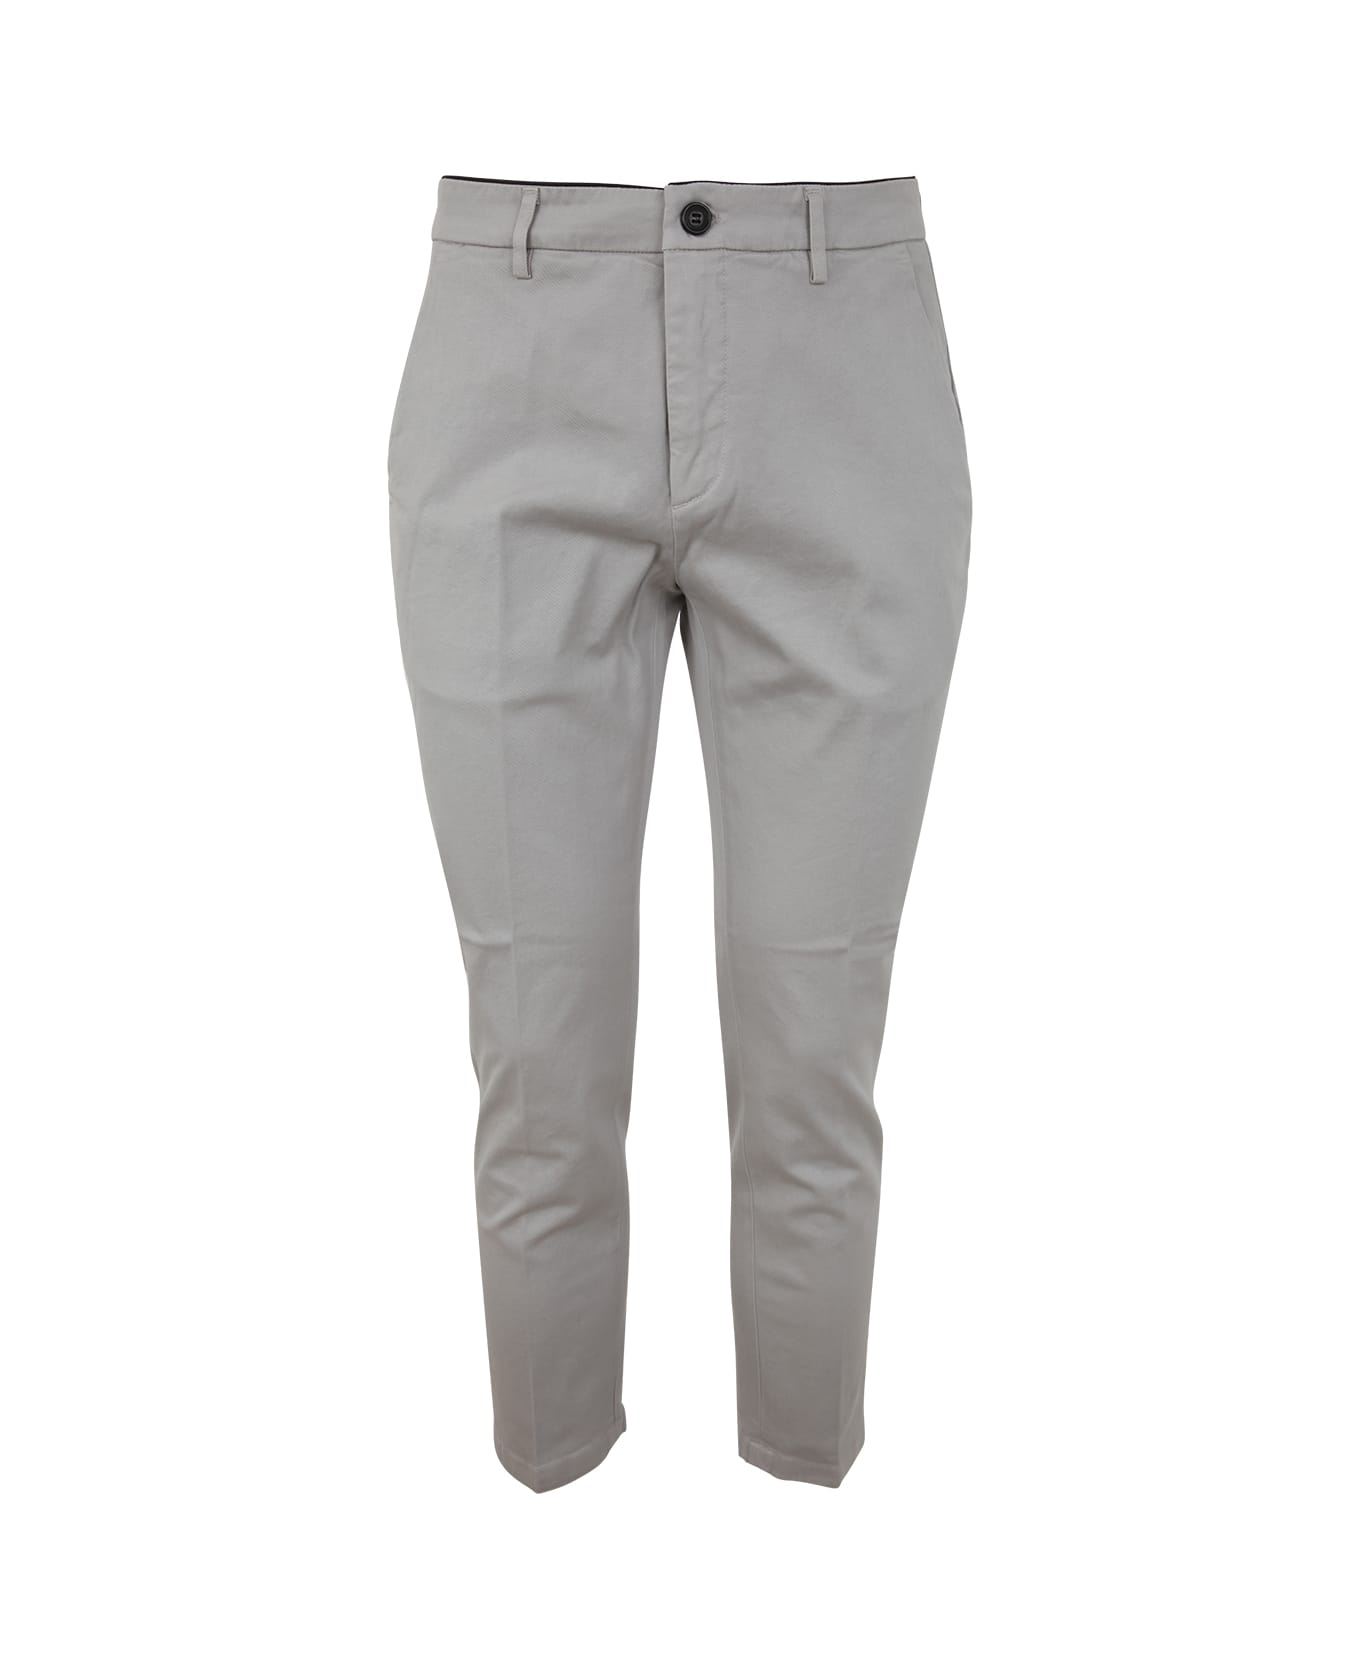 Department Five Prince Chinos Crop Trousers - Stucco